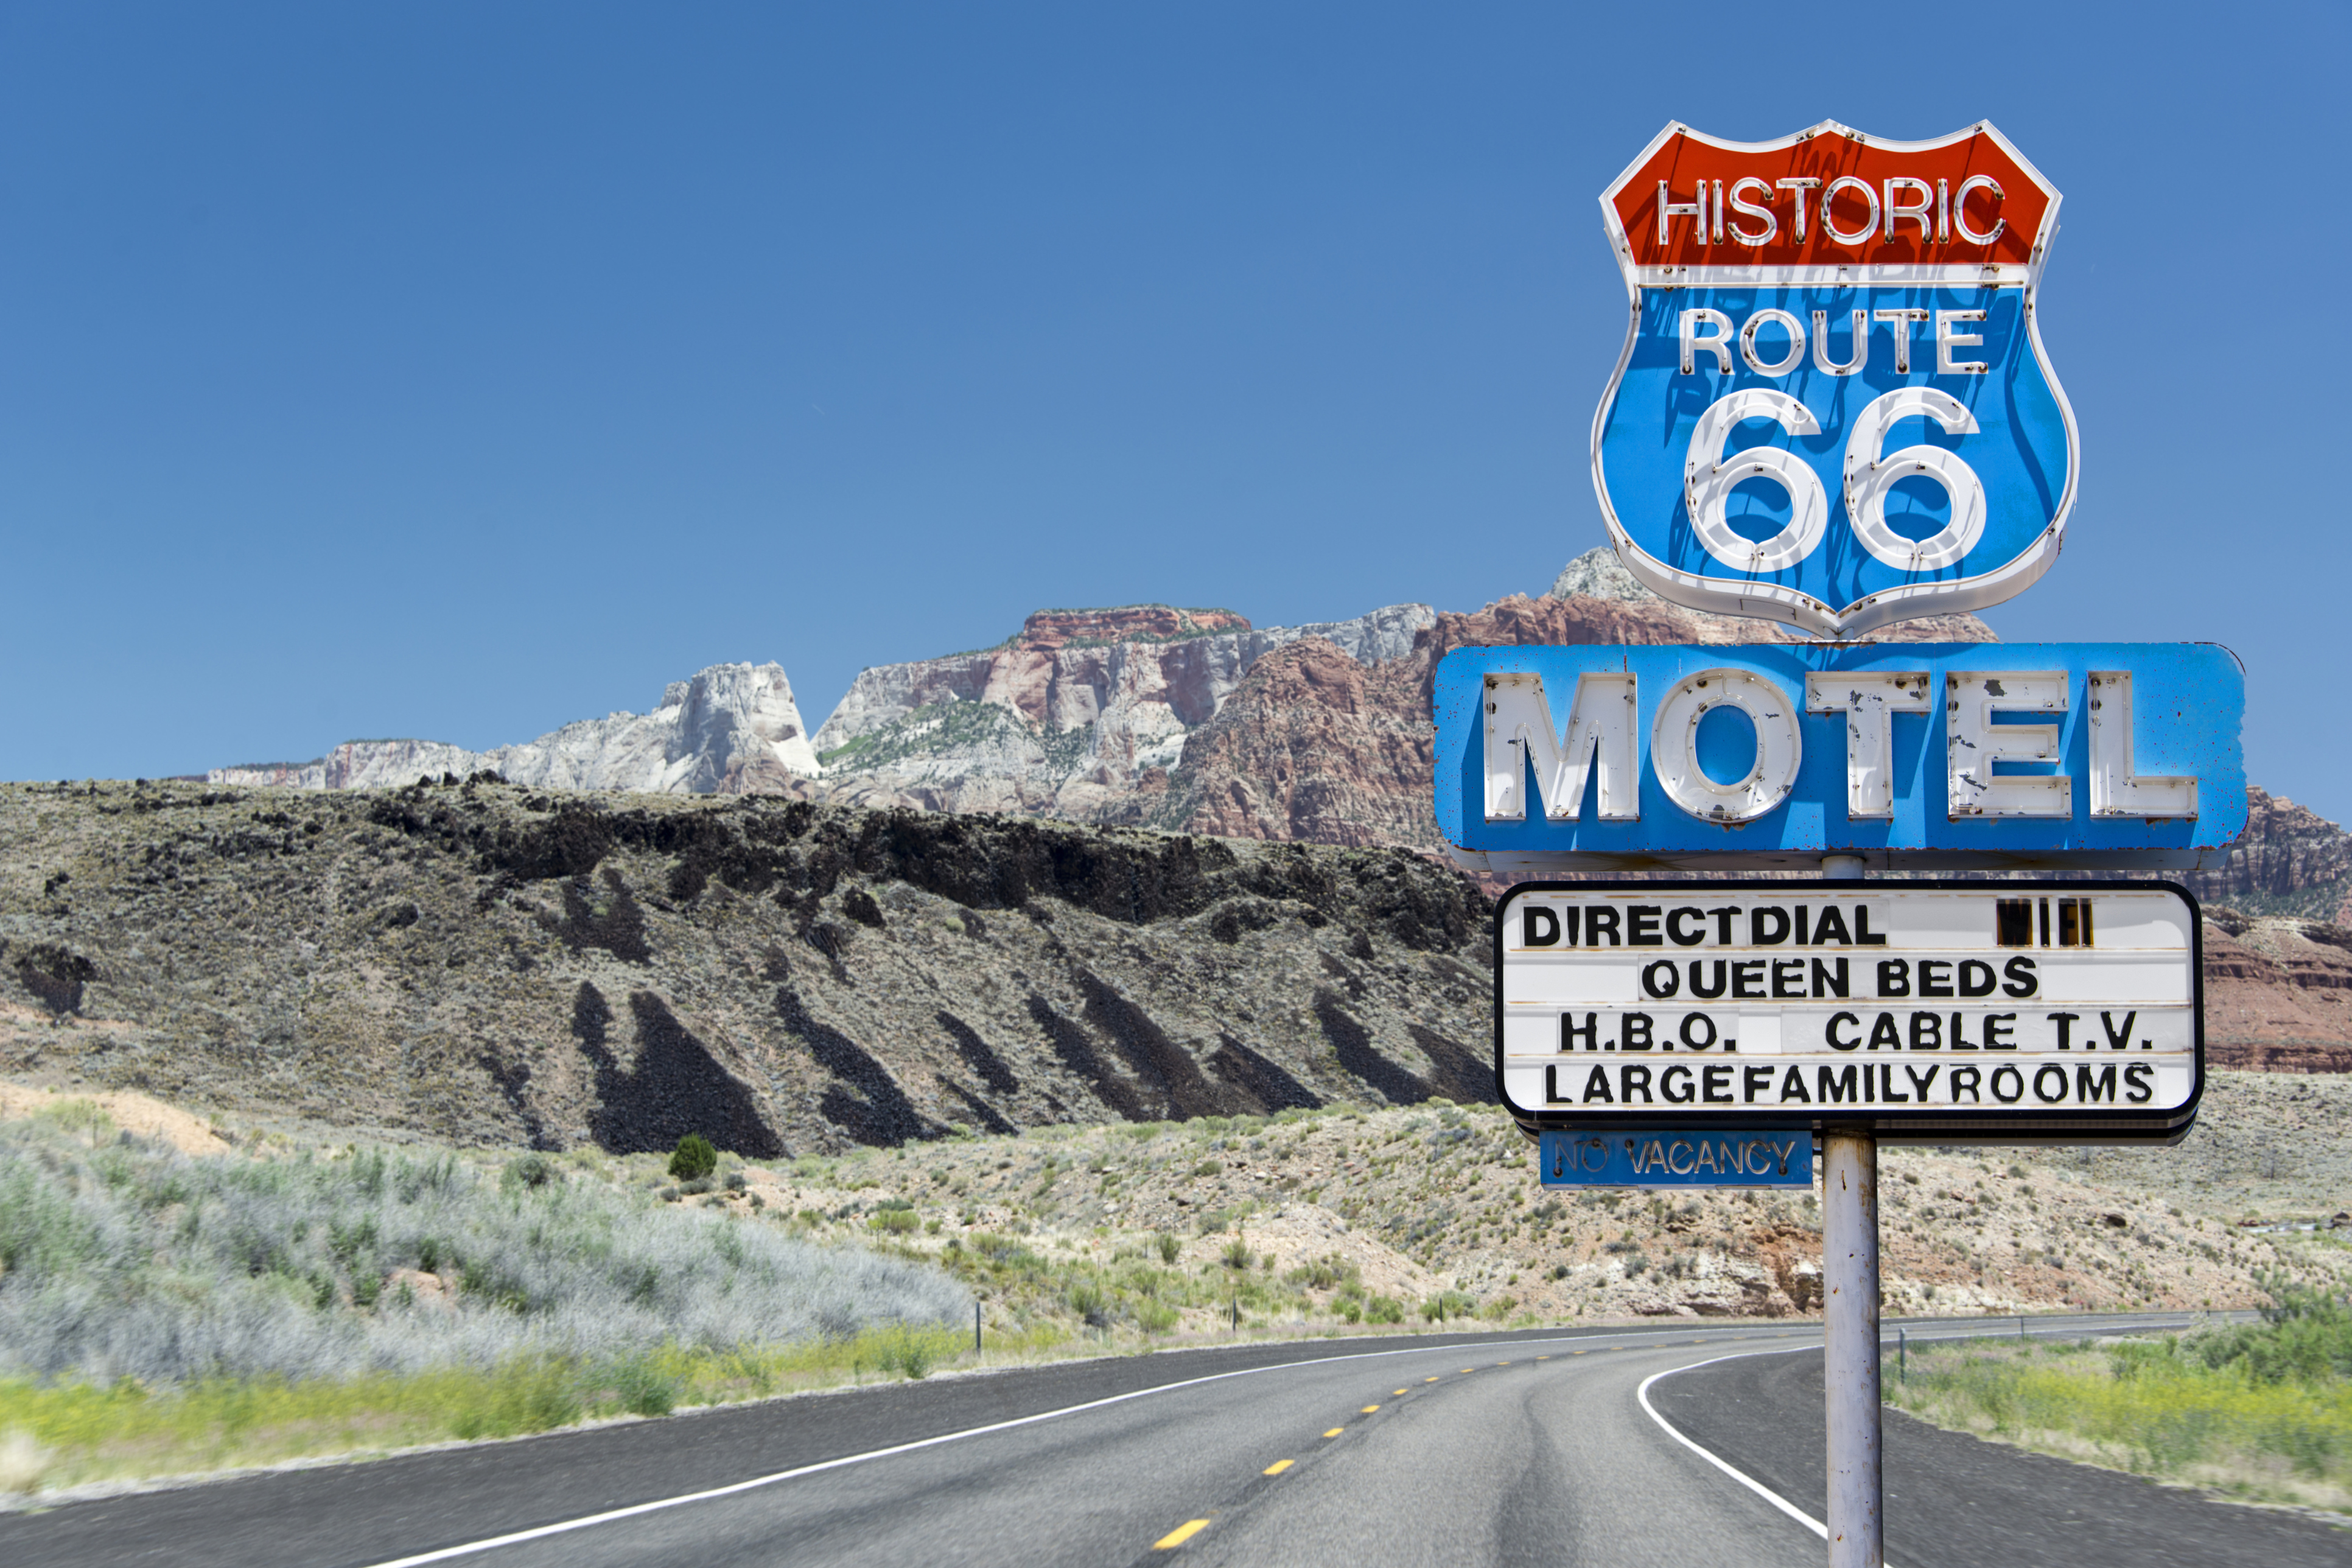 Driving Route 66 